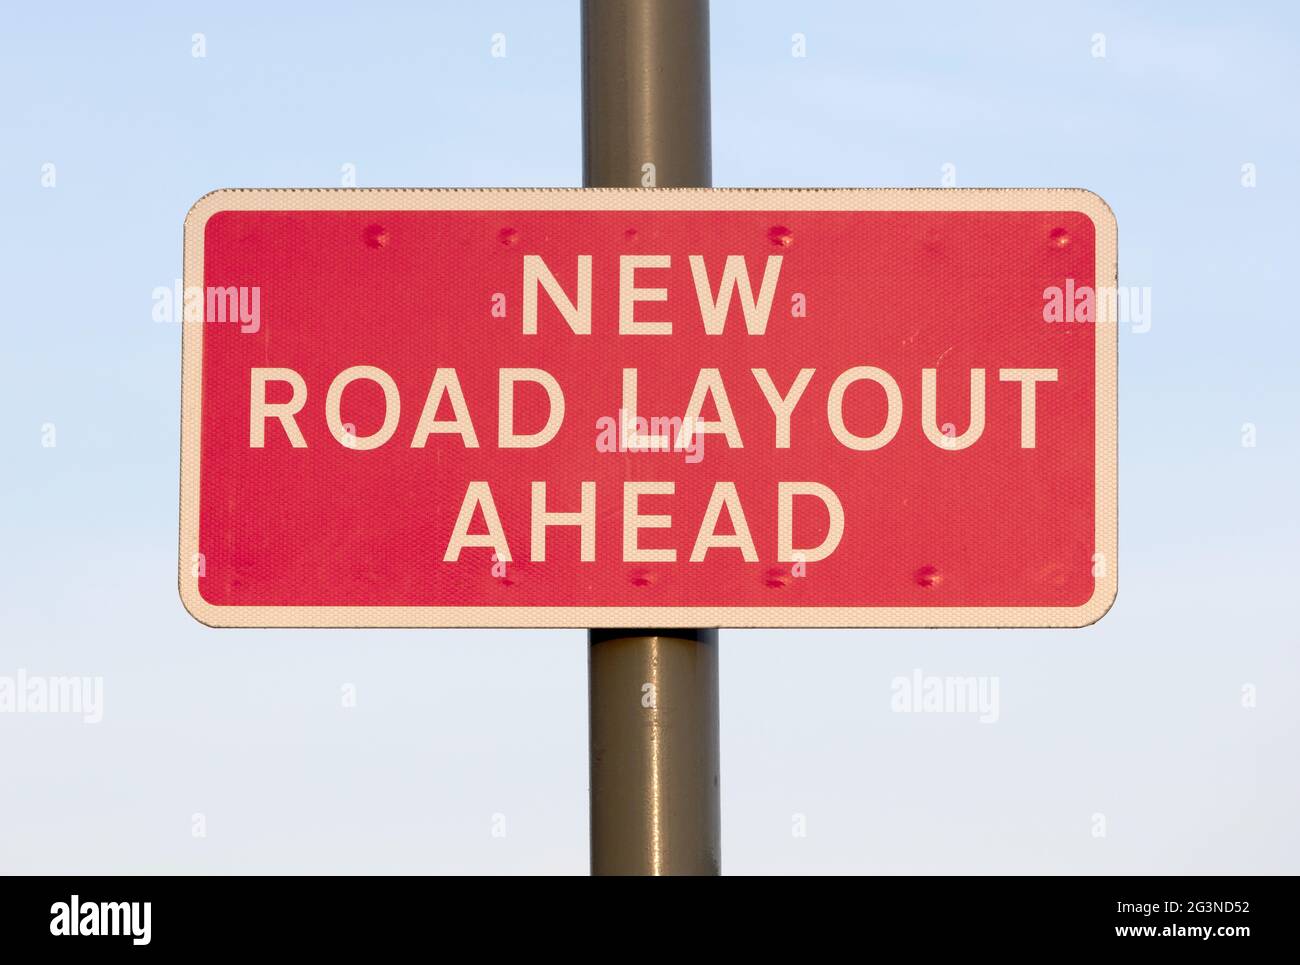 New road layout ahead sign Stock Photo